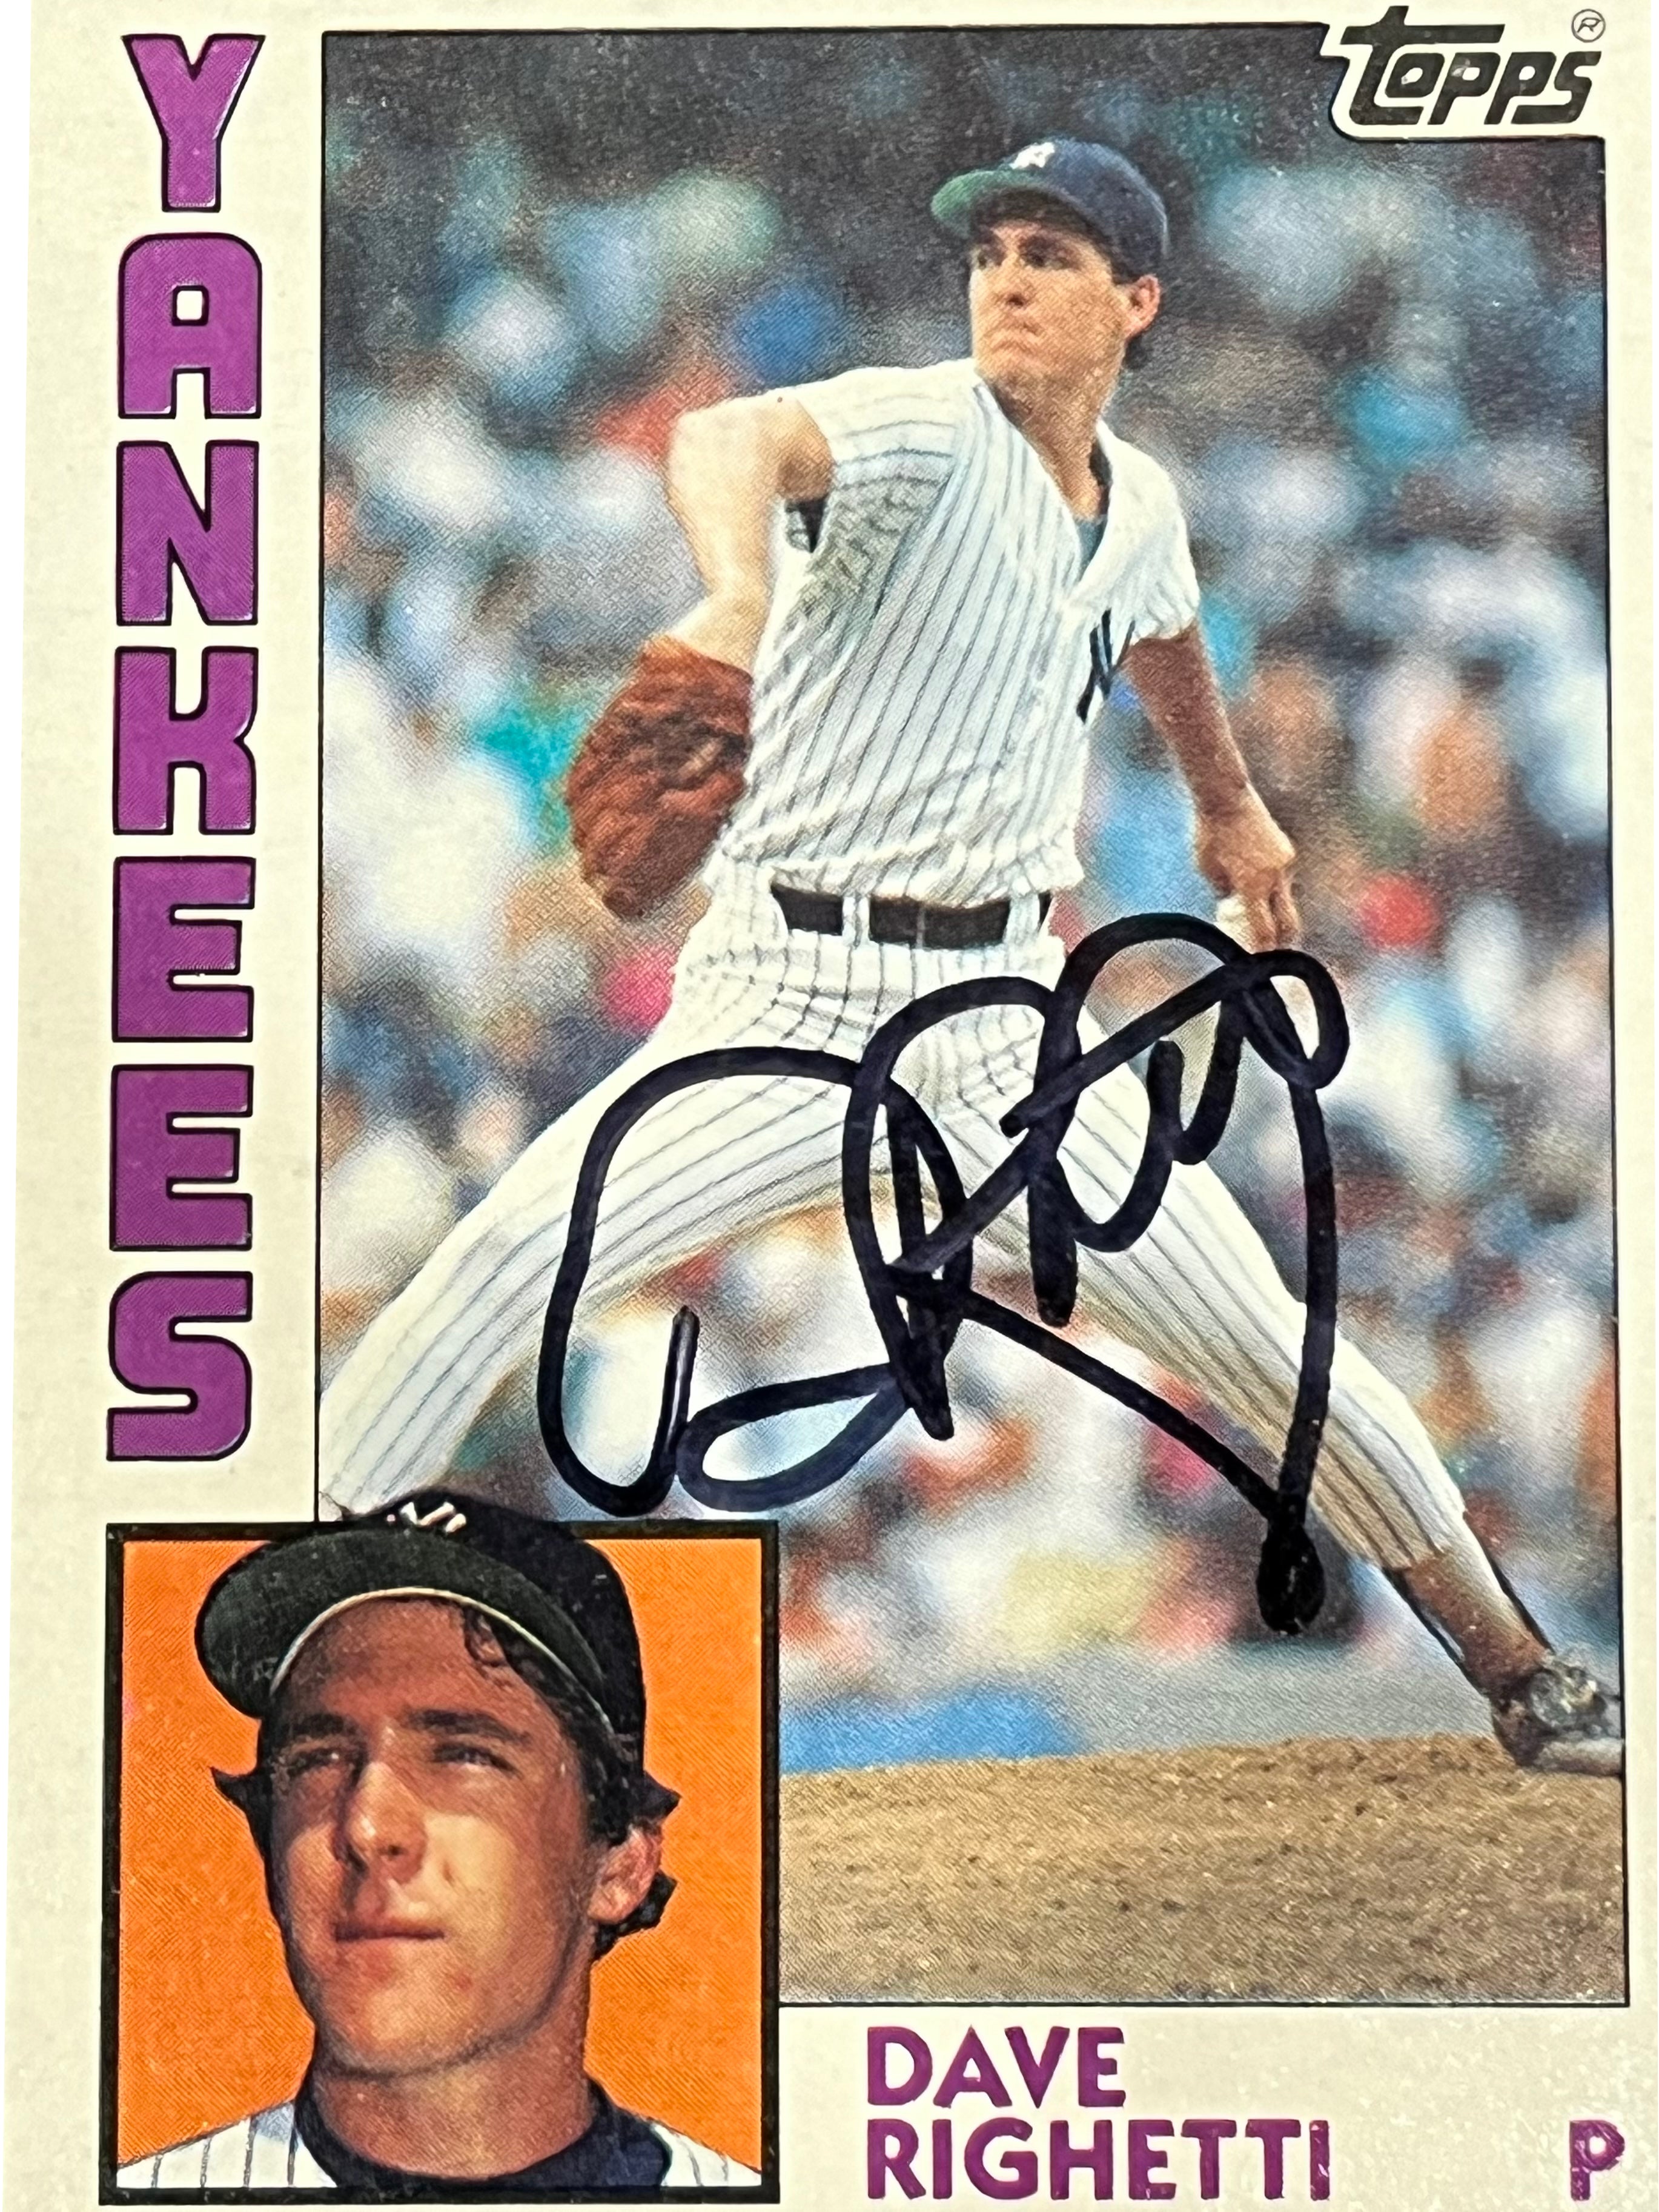 Dave Righetti 1988 Topps Autographed Baseball Card - Player's Closet Project